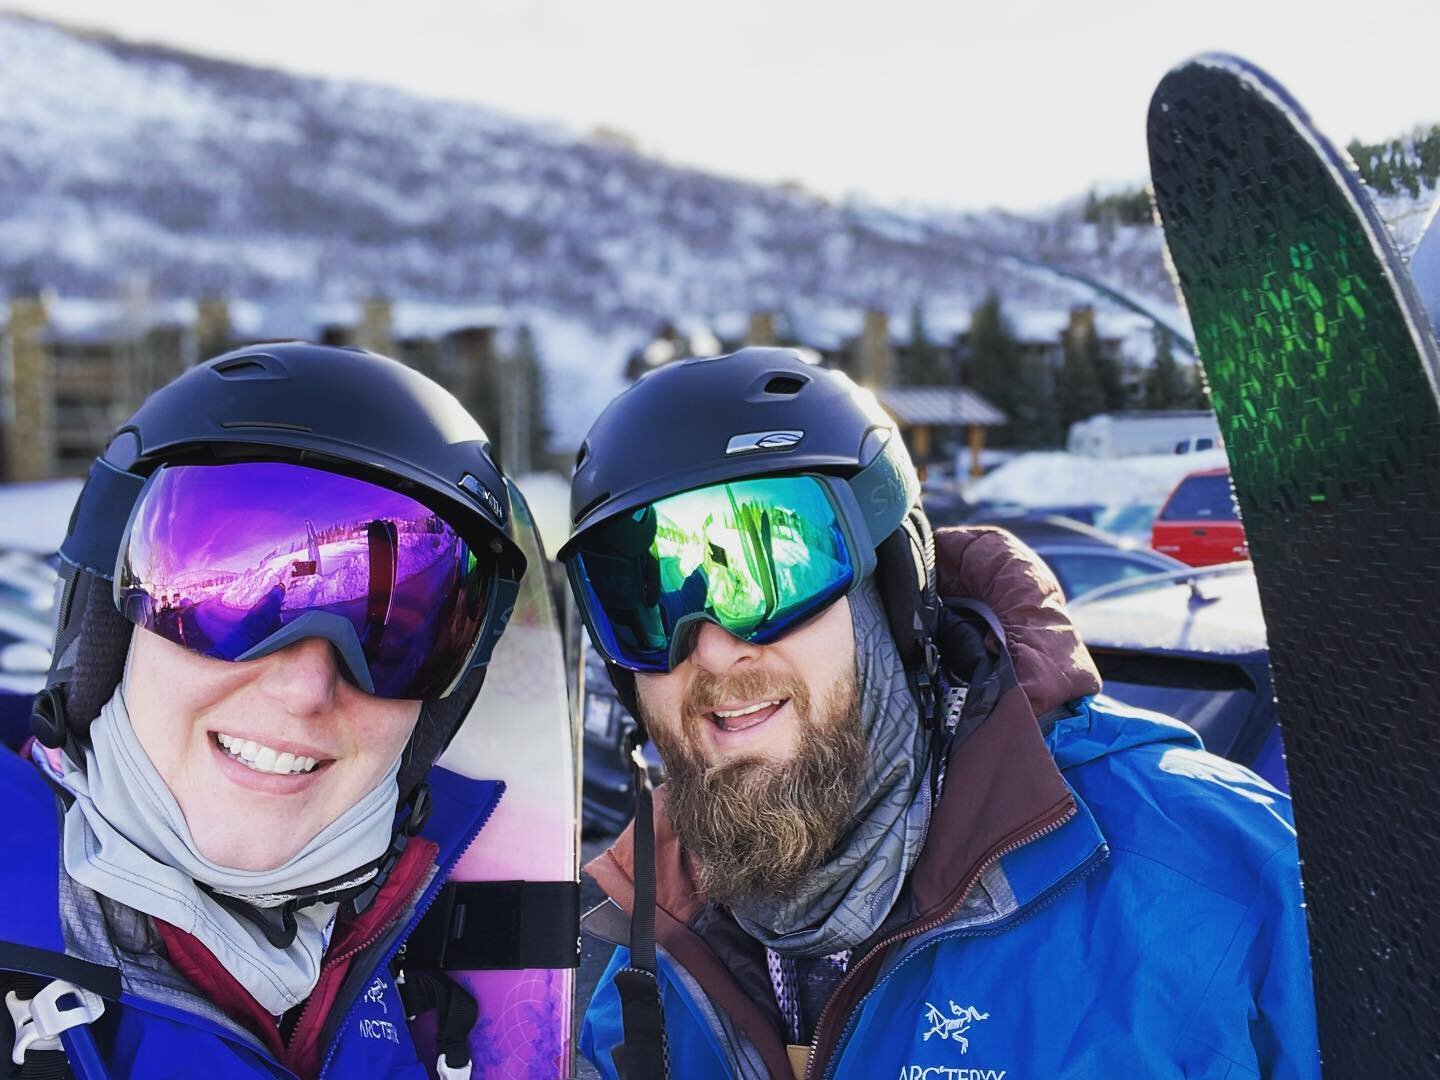 First Day on the slopes for the year!! Felt so good to get back on the snow to slide around! Yeti had a great day on the road and it looks like it&rsquo;ll be smooth sailing. ⛵️ 🌅
-
Deer Valley is pretty chill so it was a great warmup for the Winter